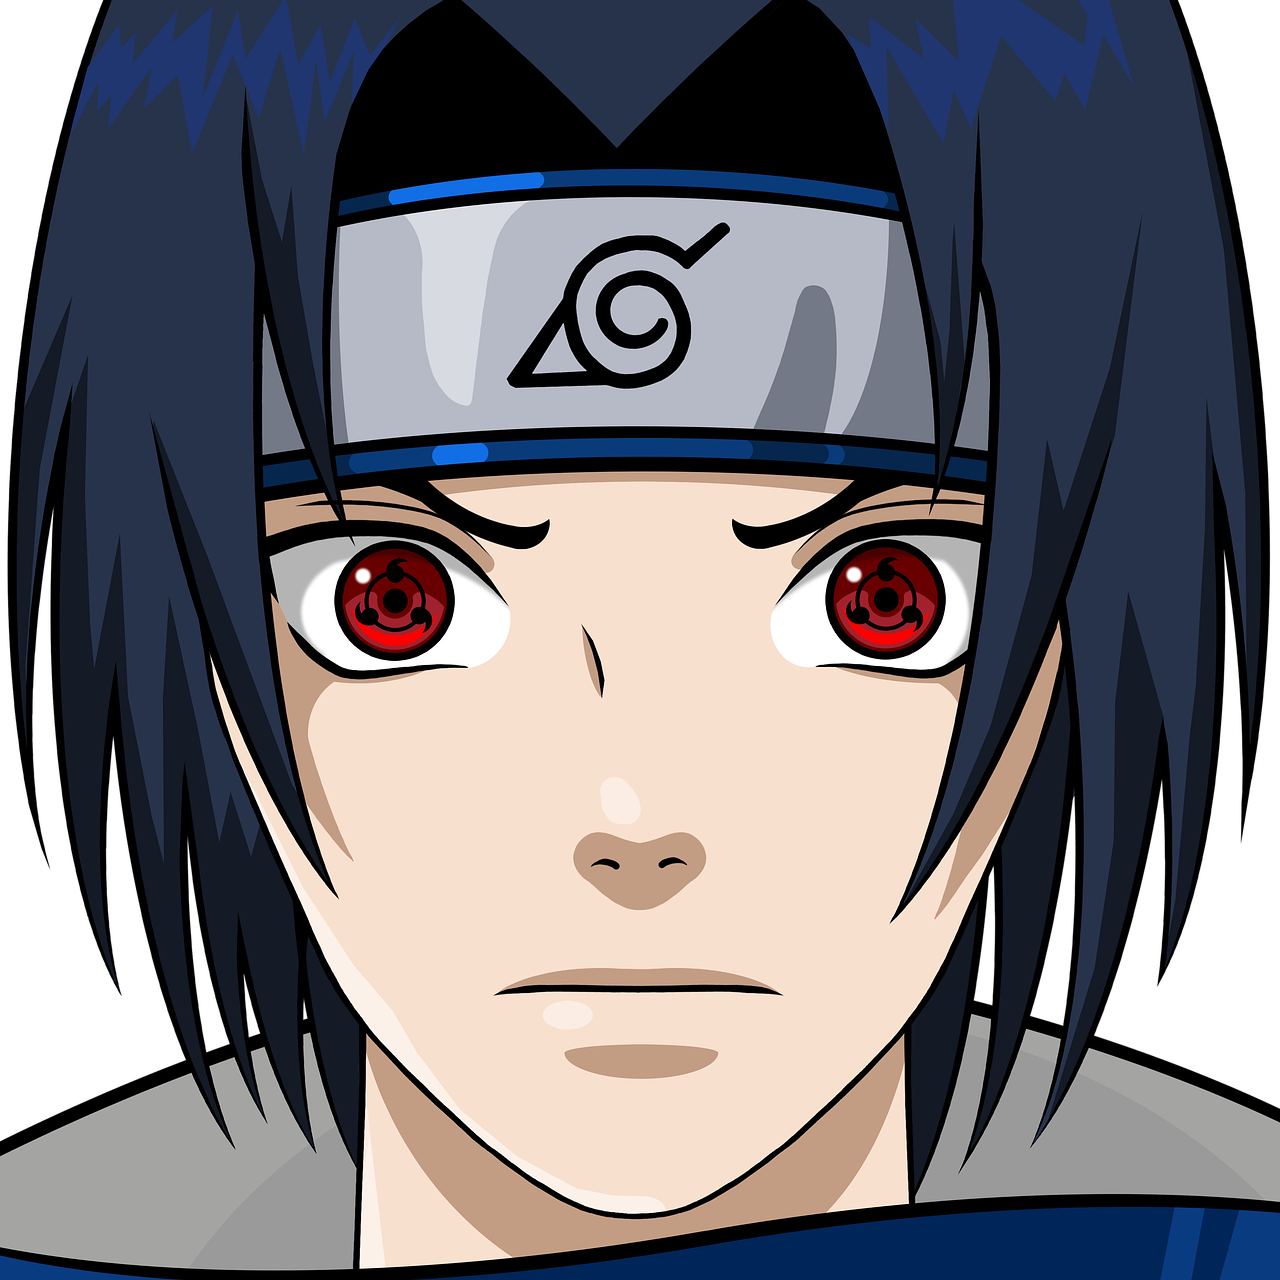 How old is Itachi Shippuden 